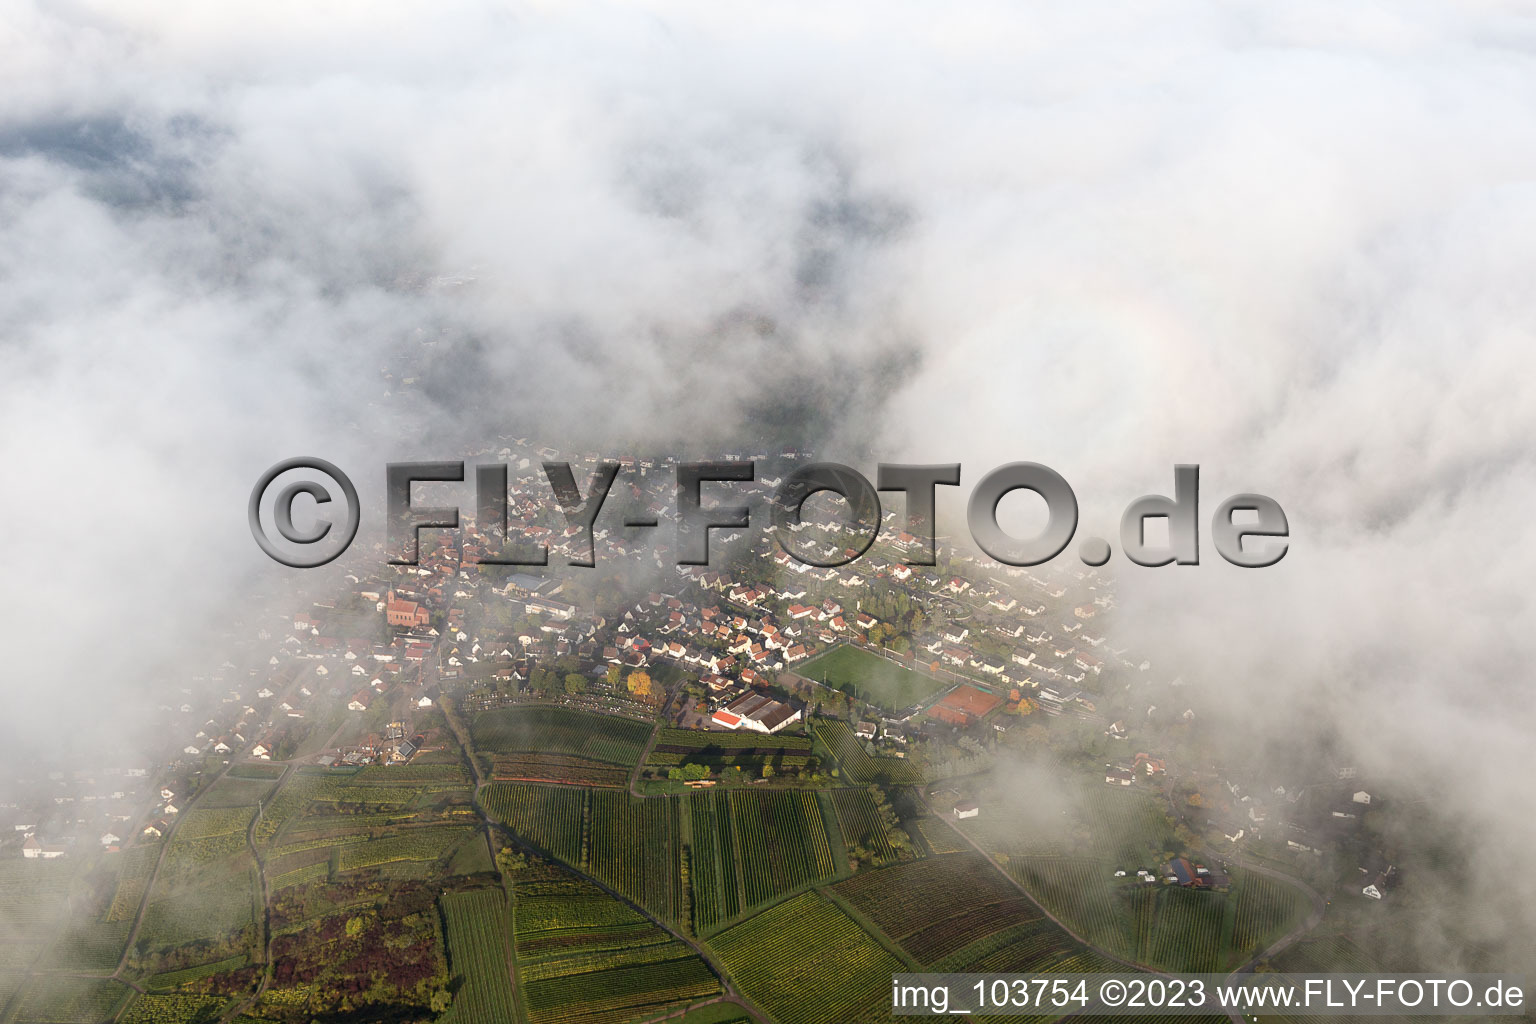 Siebeldingen in the state Rhineland-Palatinate, Germany from above